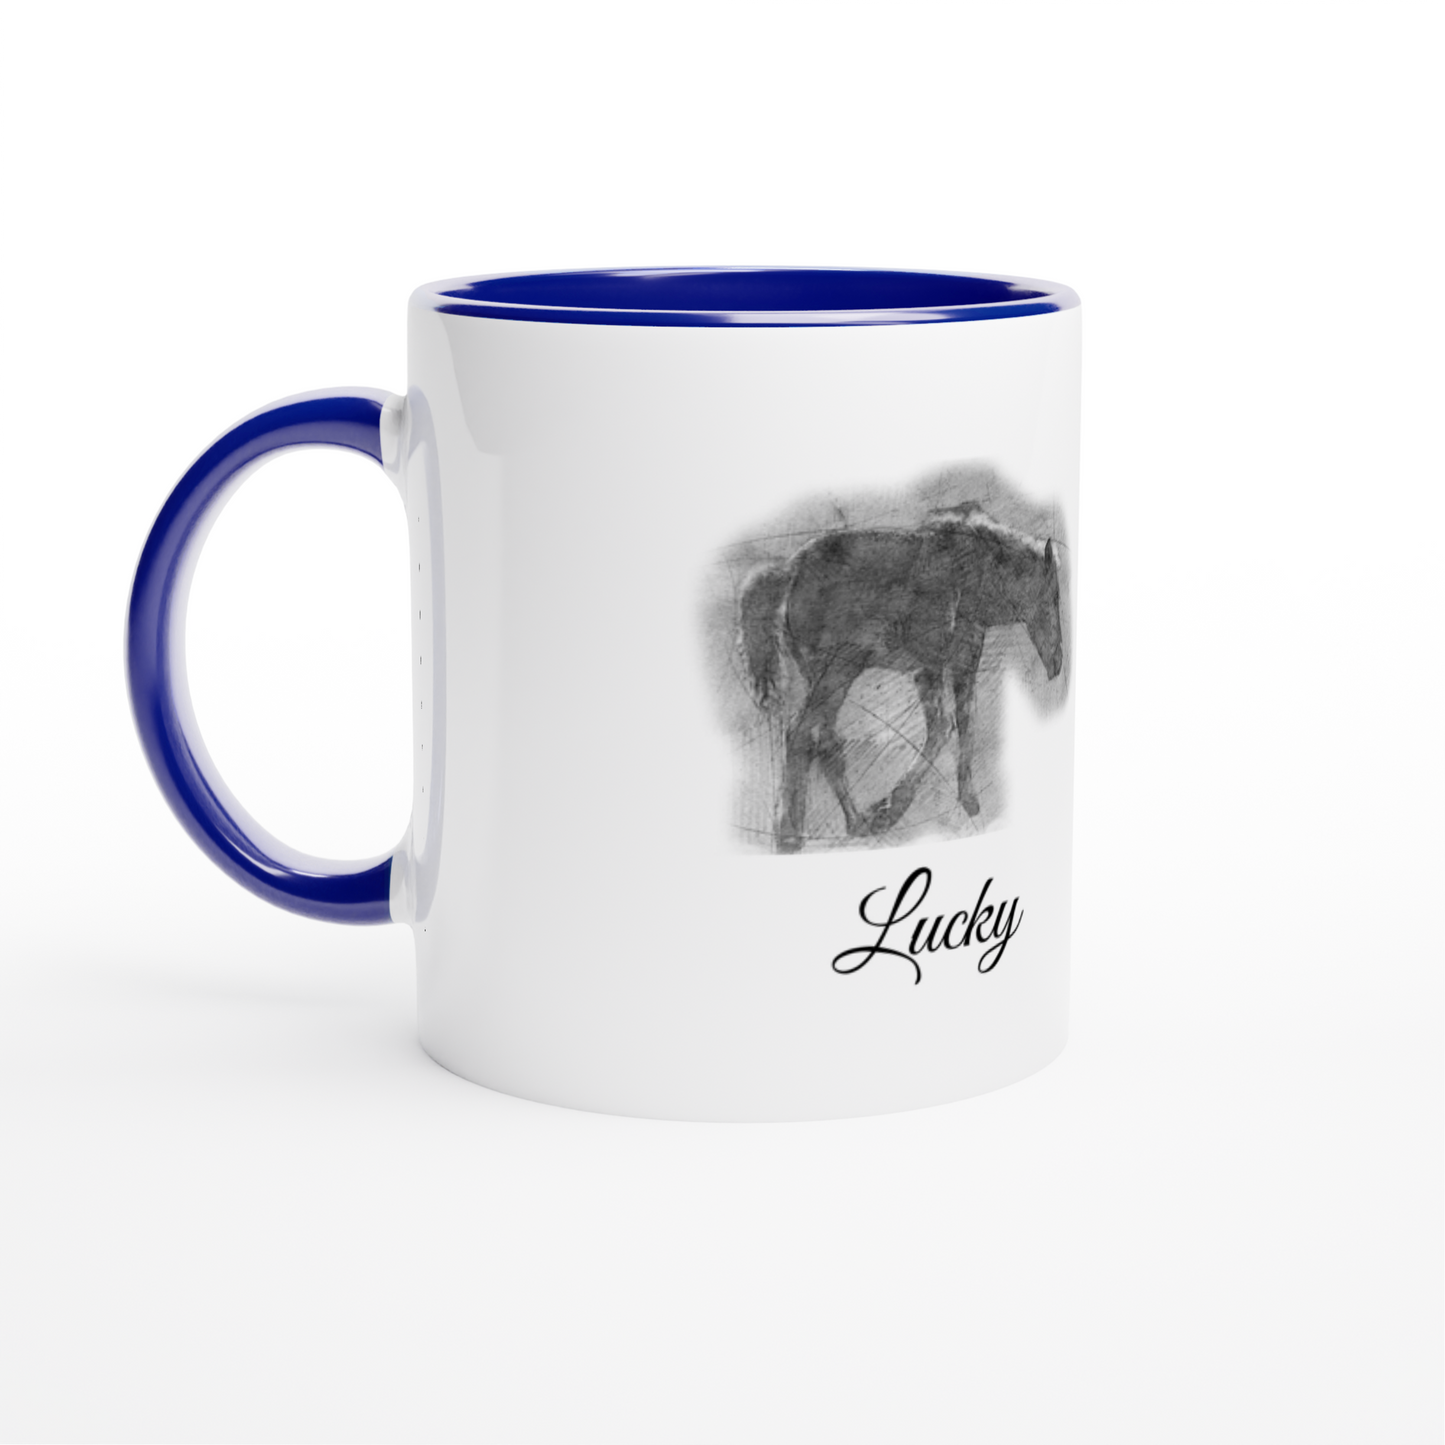 Hand Drawn Horse || 11oz Ceramic Mug with Color - Pencil Drawing - Personalized; Personalized with your horse